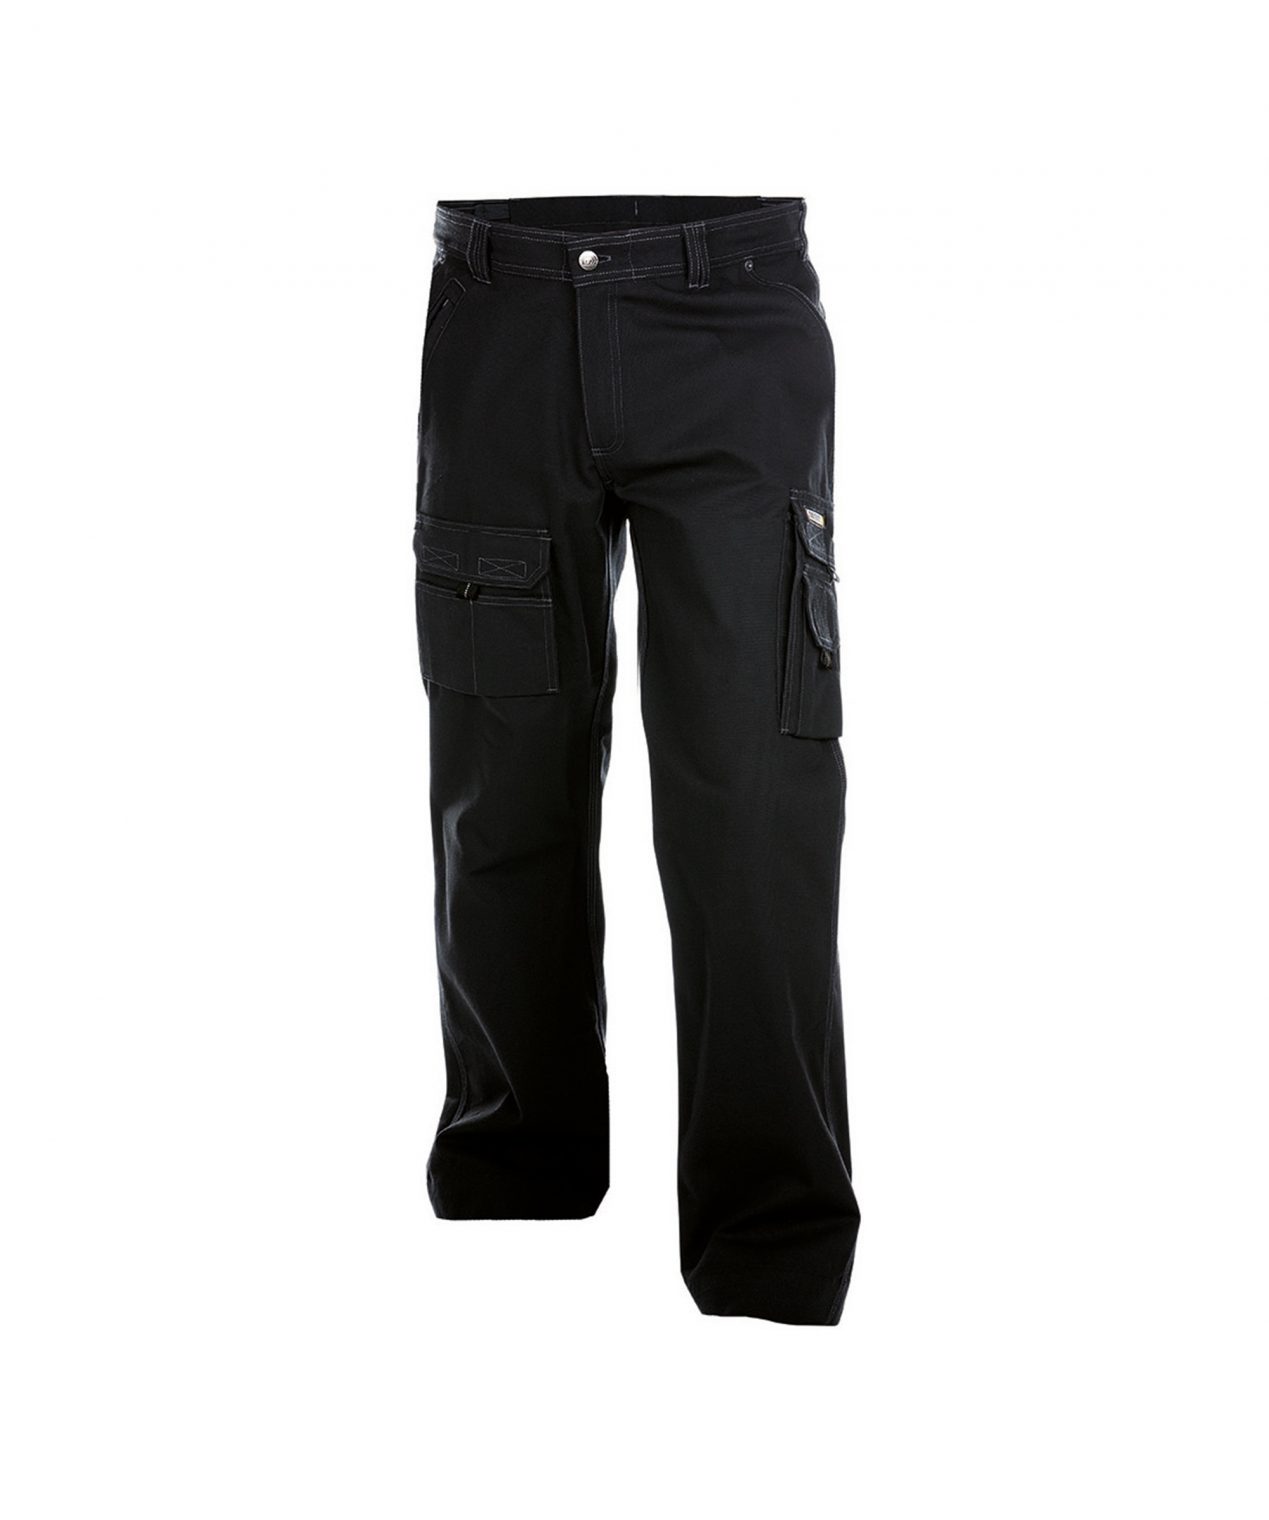 kingston canvas work trousers black front